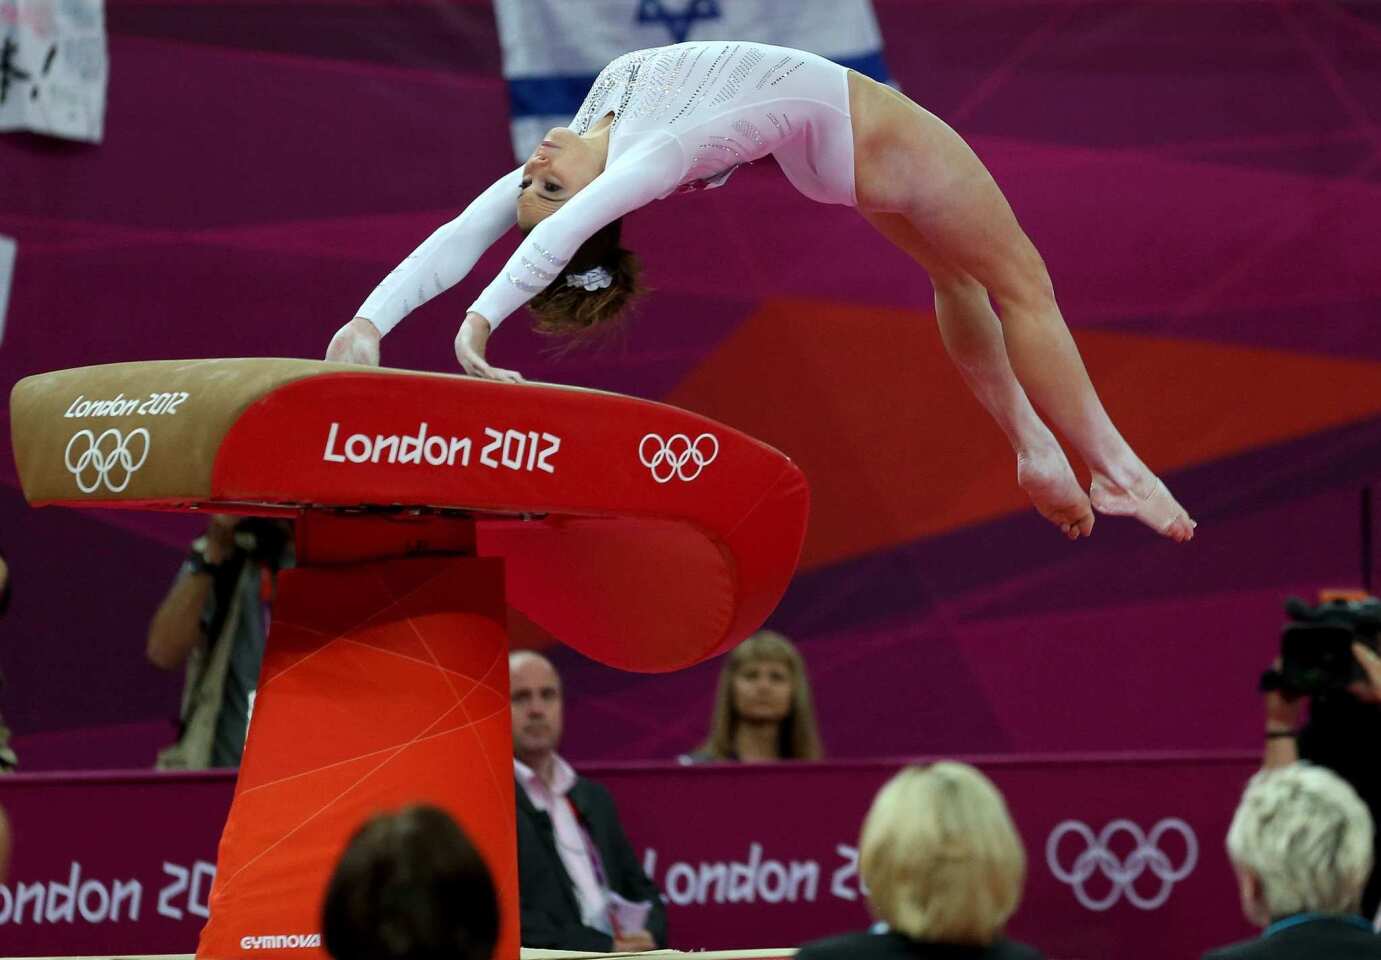 McKayla Maroney of the United States competes in the artistic gymnastics women's vault final at the London 2012 Olympic Games.